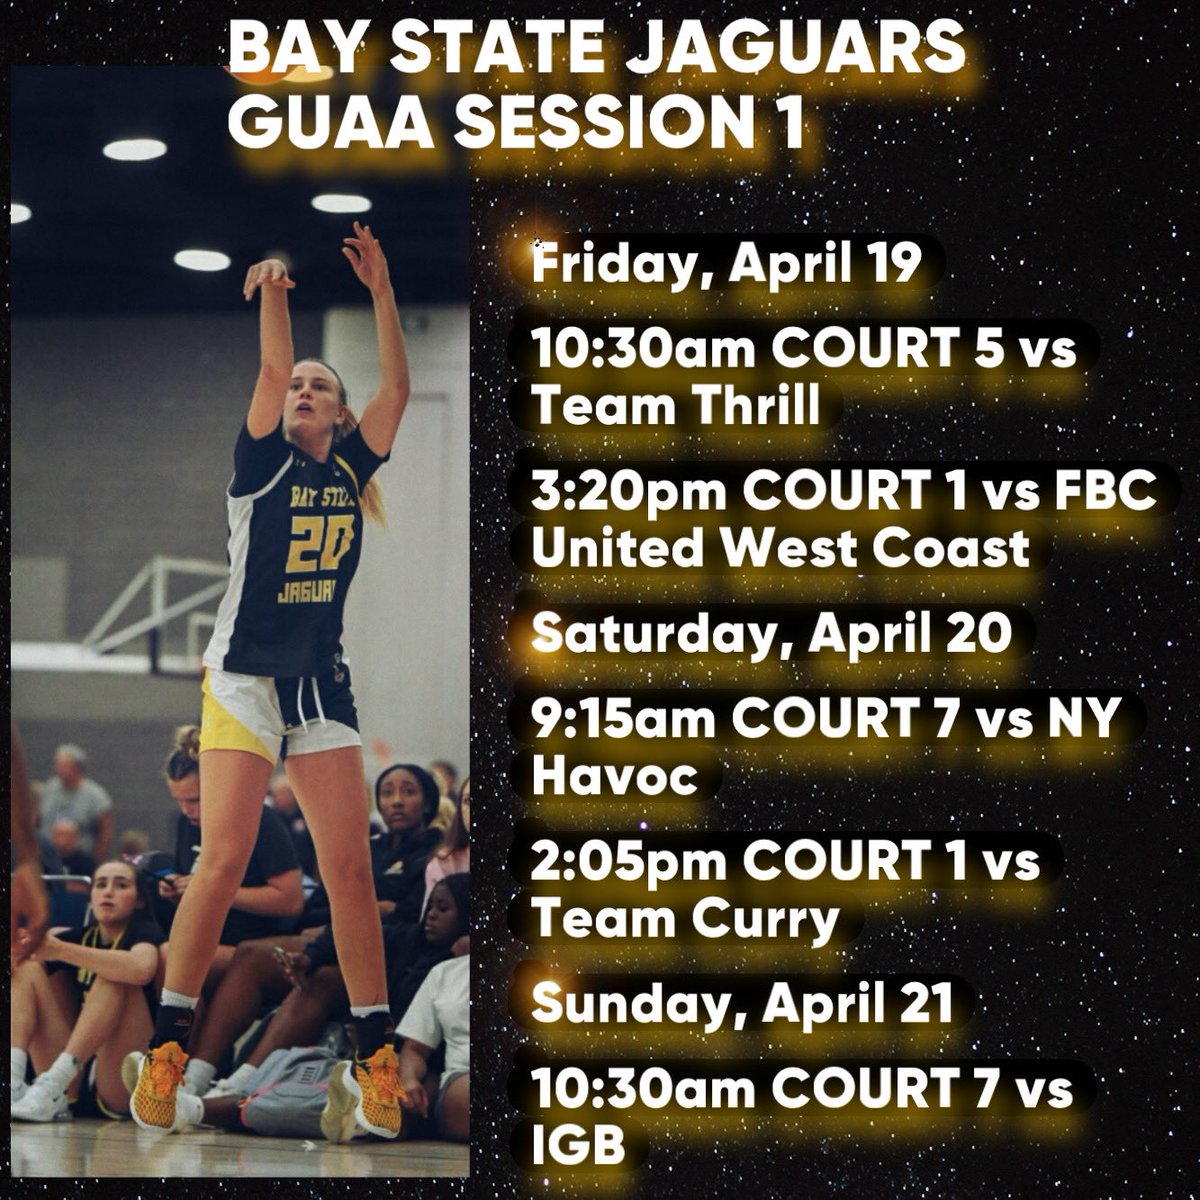 Last ride with the best! 💛🖤Schedule for GUAA Session 1 this weekend in Spooky Nook, PA!! Let’s go🔥@BayStateJags